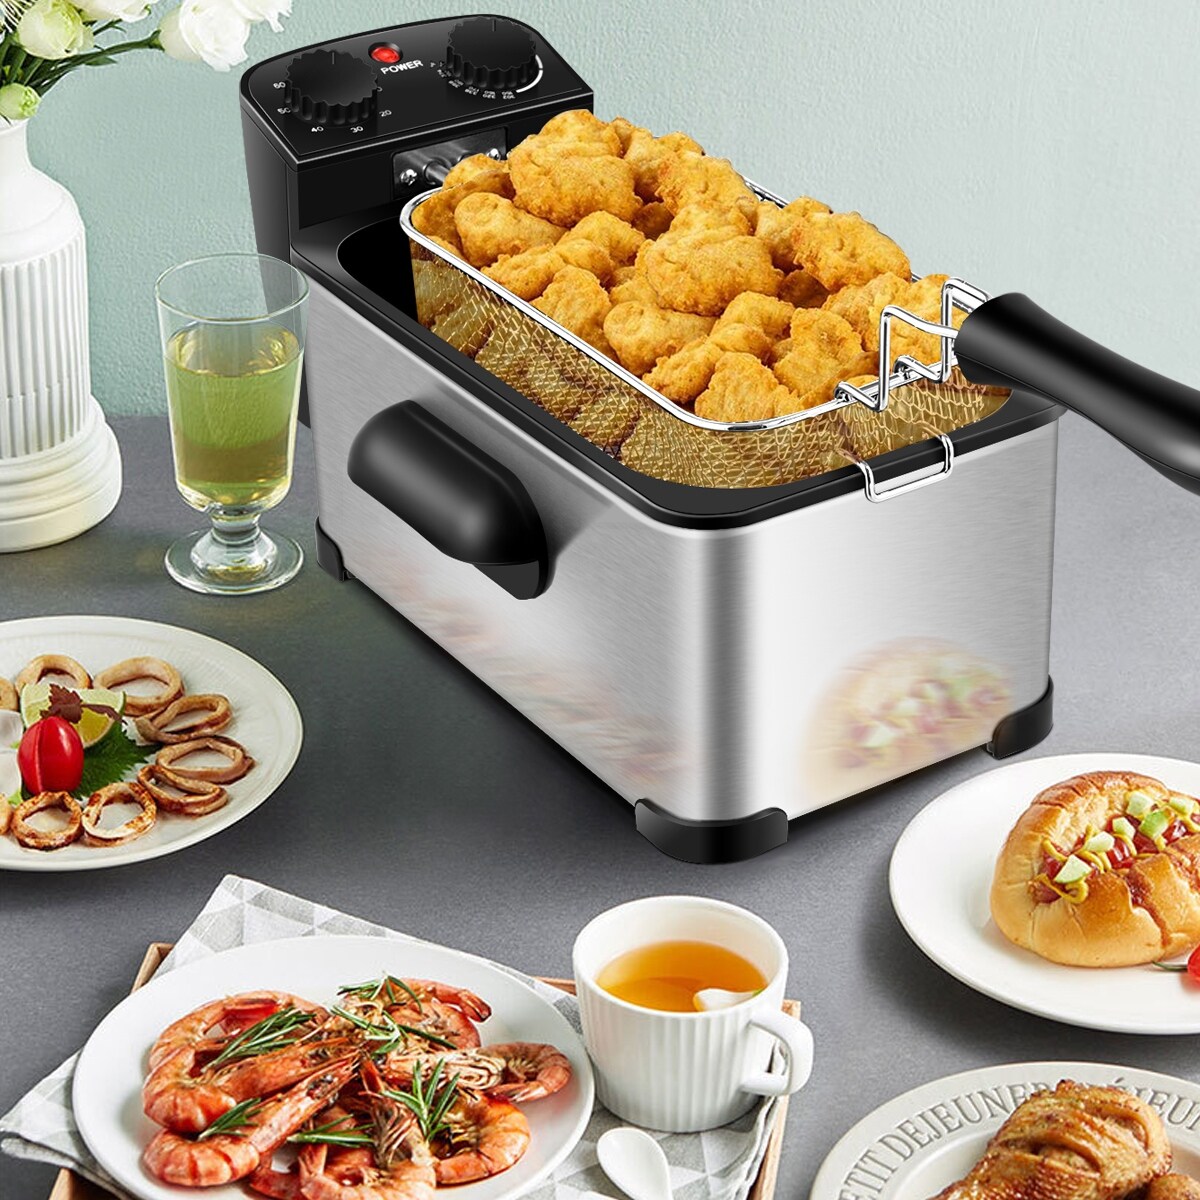 https://ak1.ostkcdn.com/images/products/is/images/direct/bb37ba8f6e974c6da373f8b2e42a9220f735d074/Costway-3.2-Quart-Electric-Deep-Fryer-1700W-Stainless-Steel-Timer.jpg